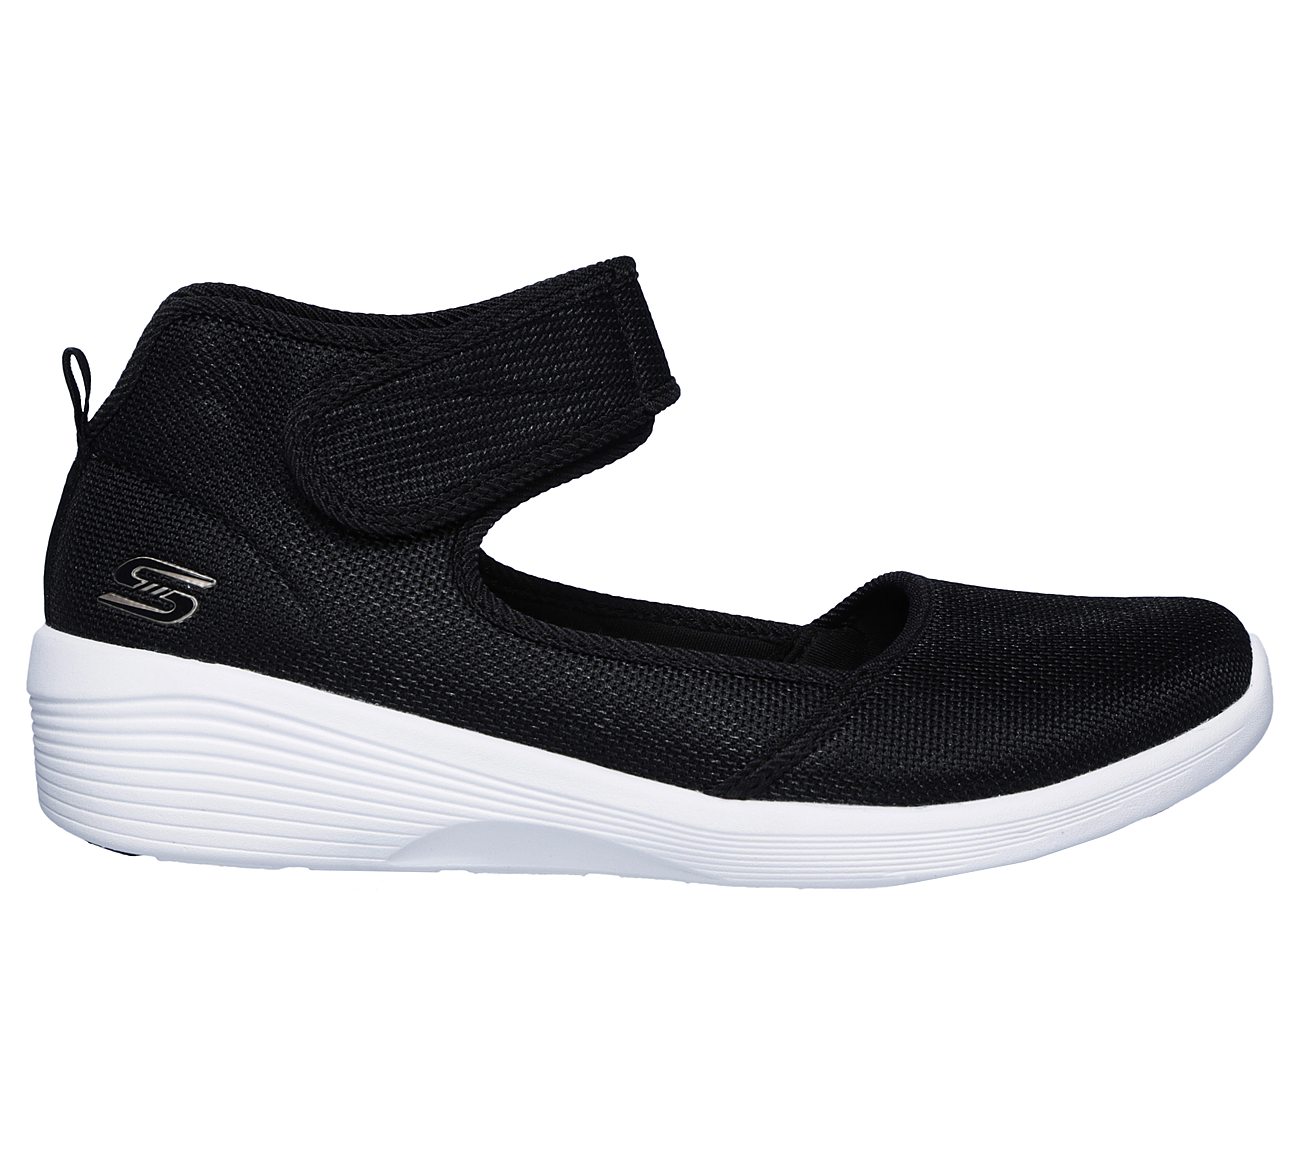 skechers with velcro straps